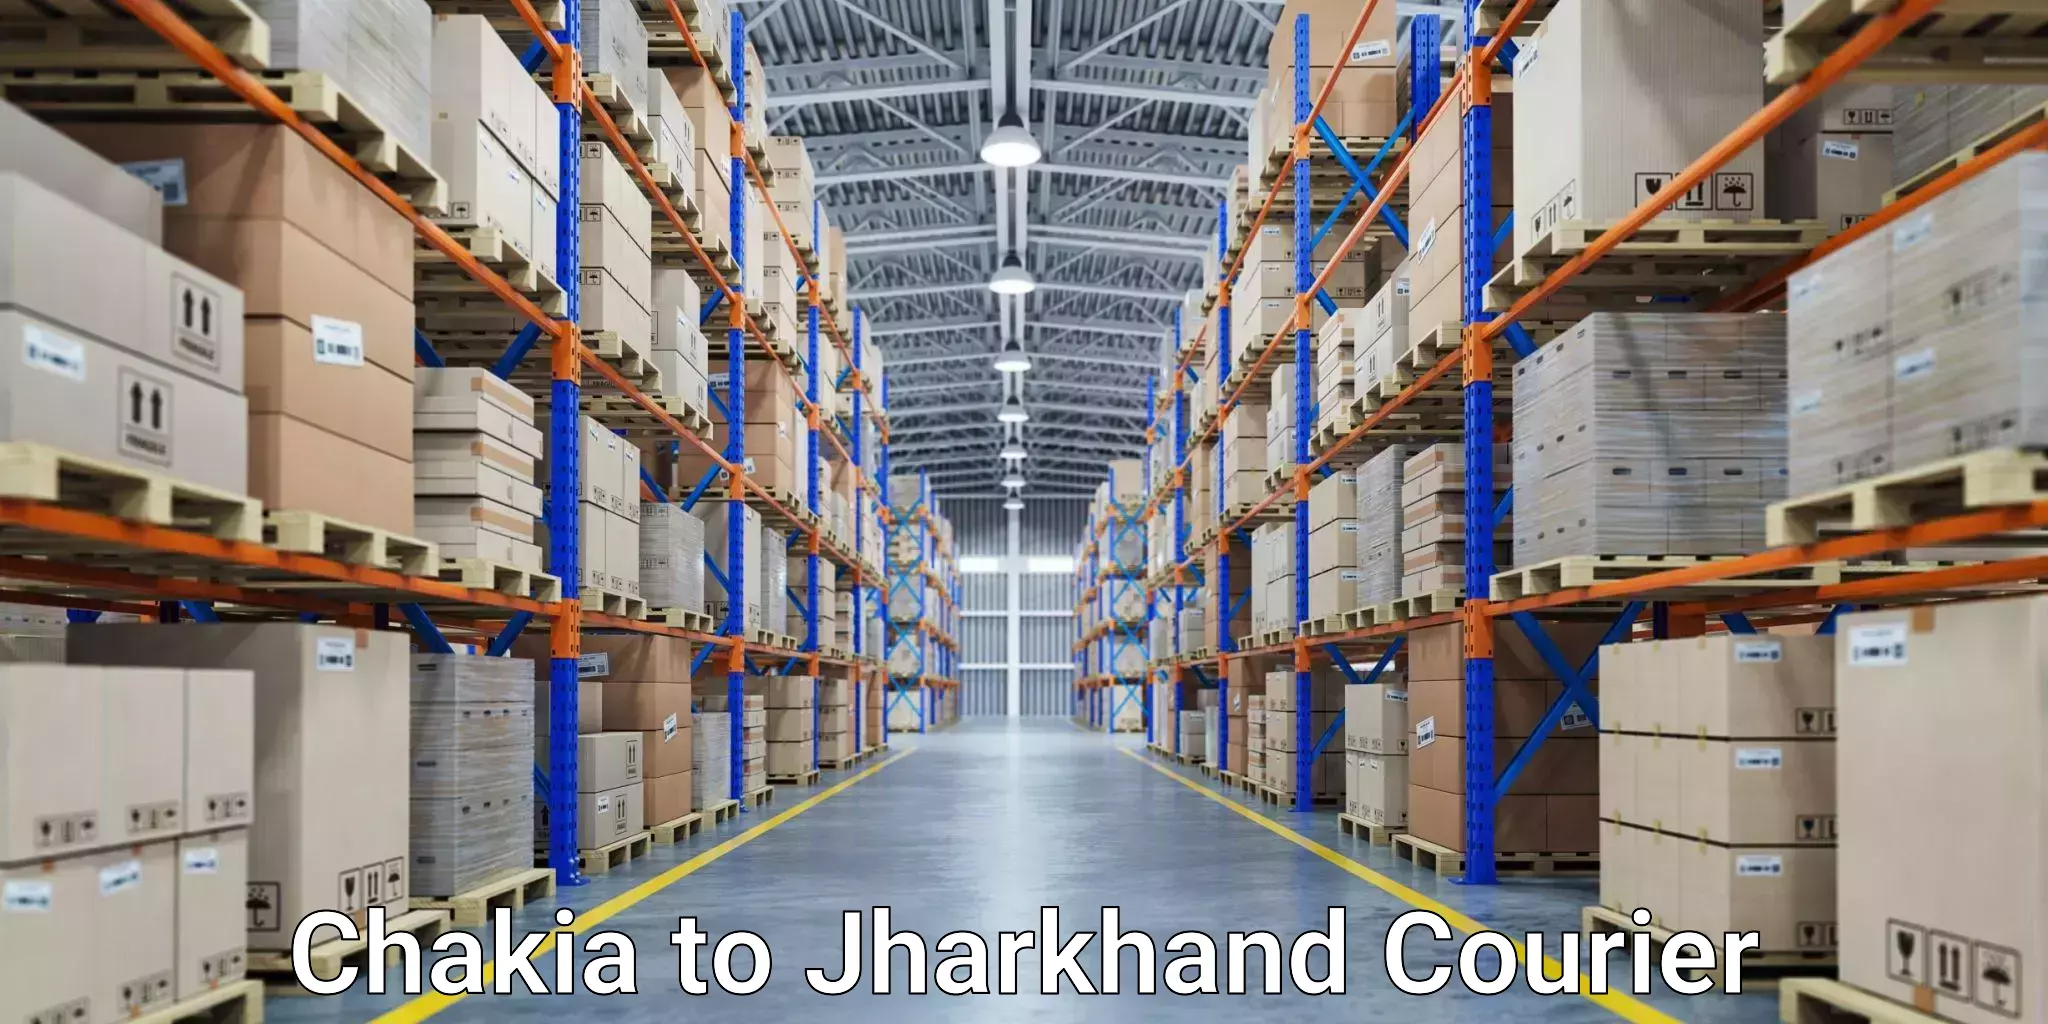 Fast-track shipping solutions Chakia to IIIT Ranchi